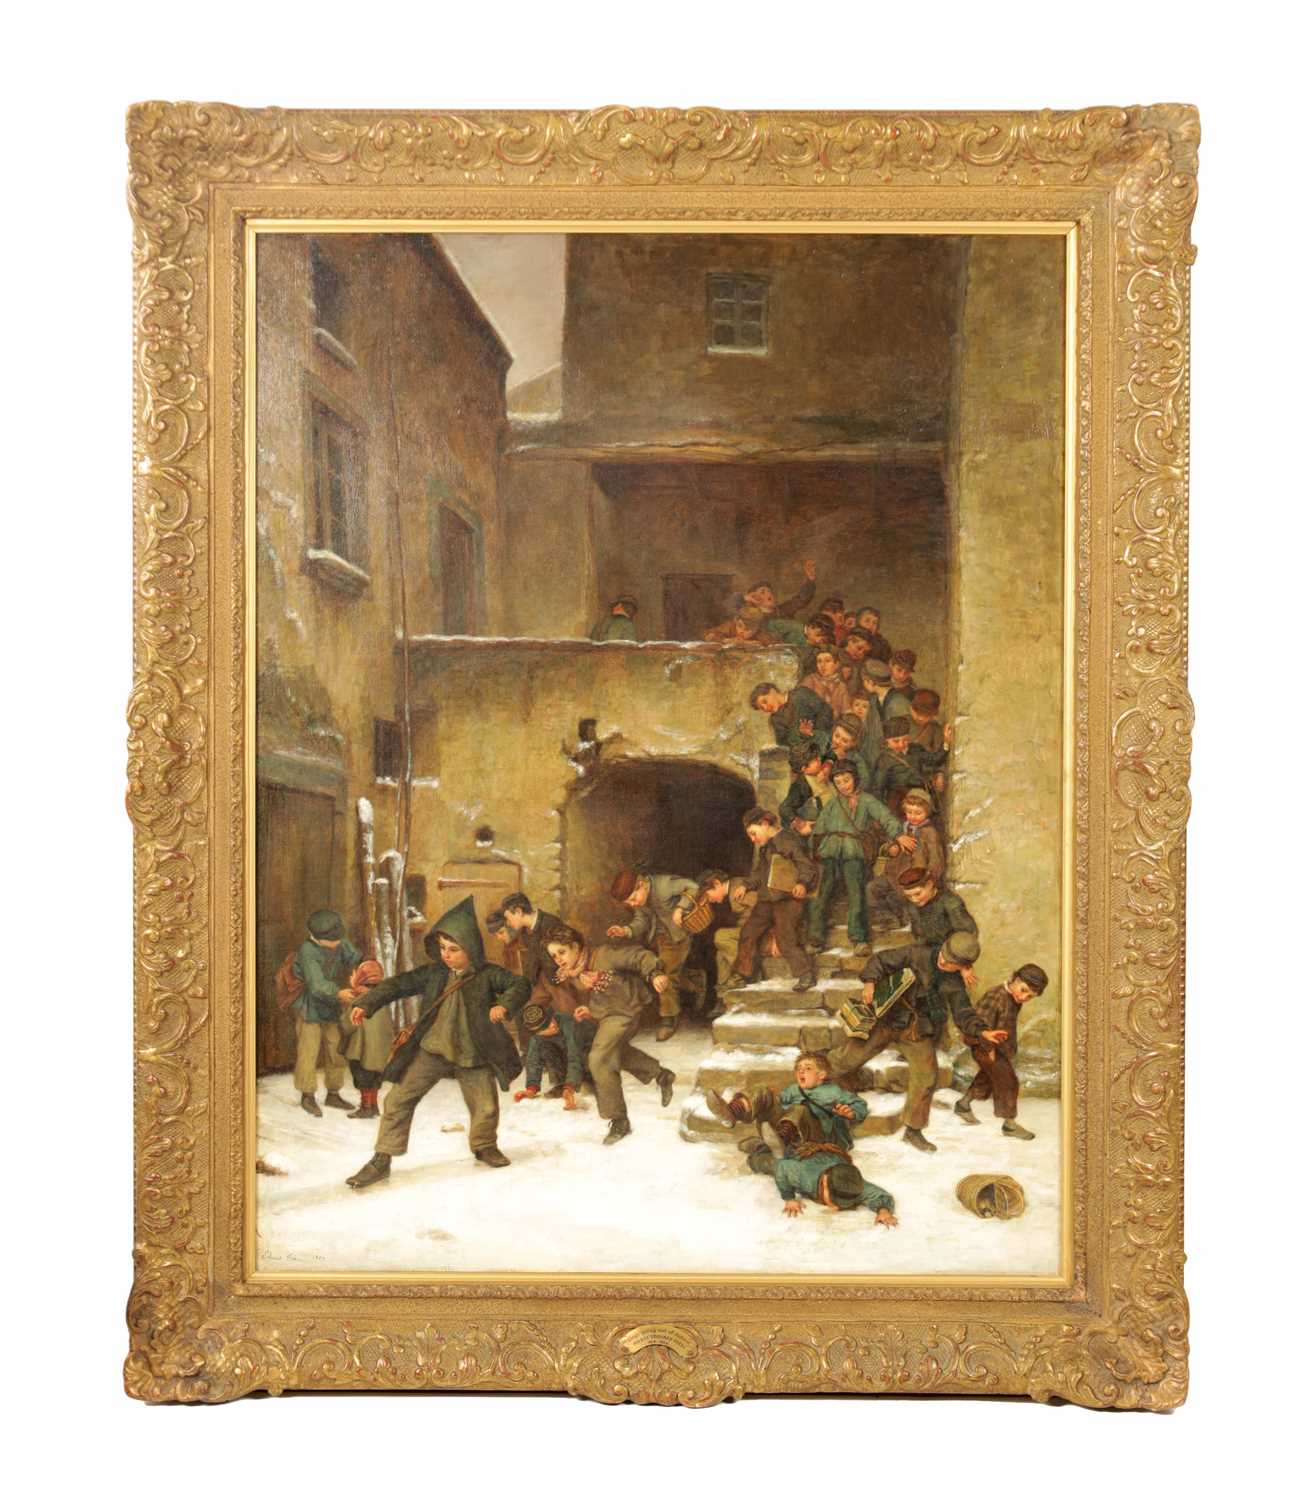 Lot 894 - PIERRE-EDOUARD FRERE (FRENCH, 1819-1886) OIL ON CANVAS 'PLAY TIME AFTER SCHOOL'